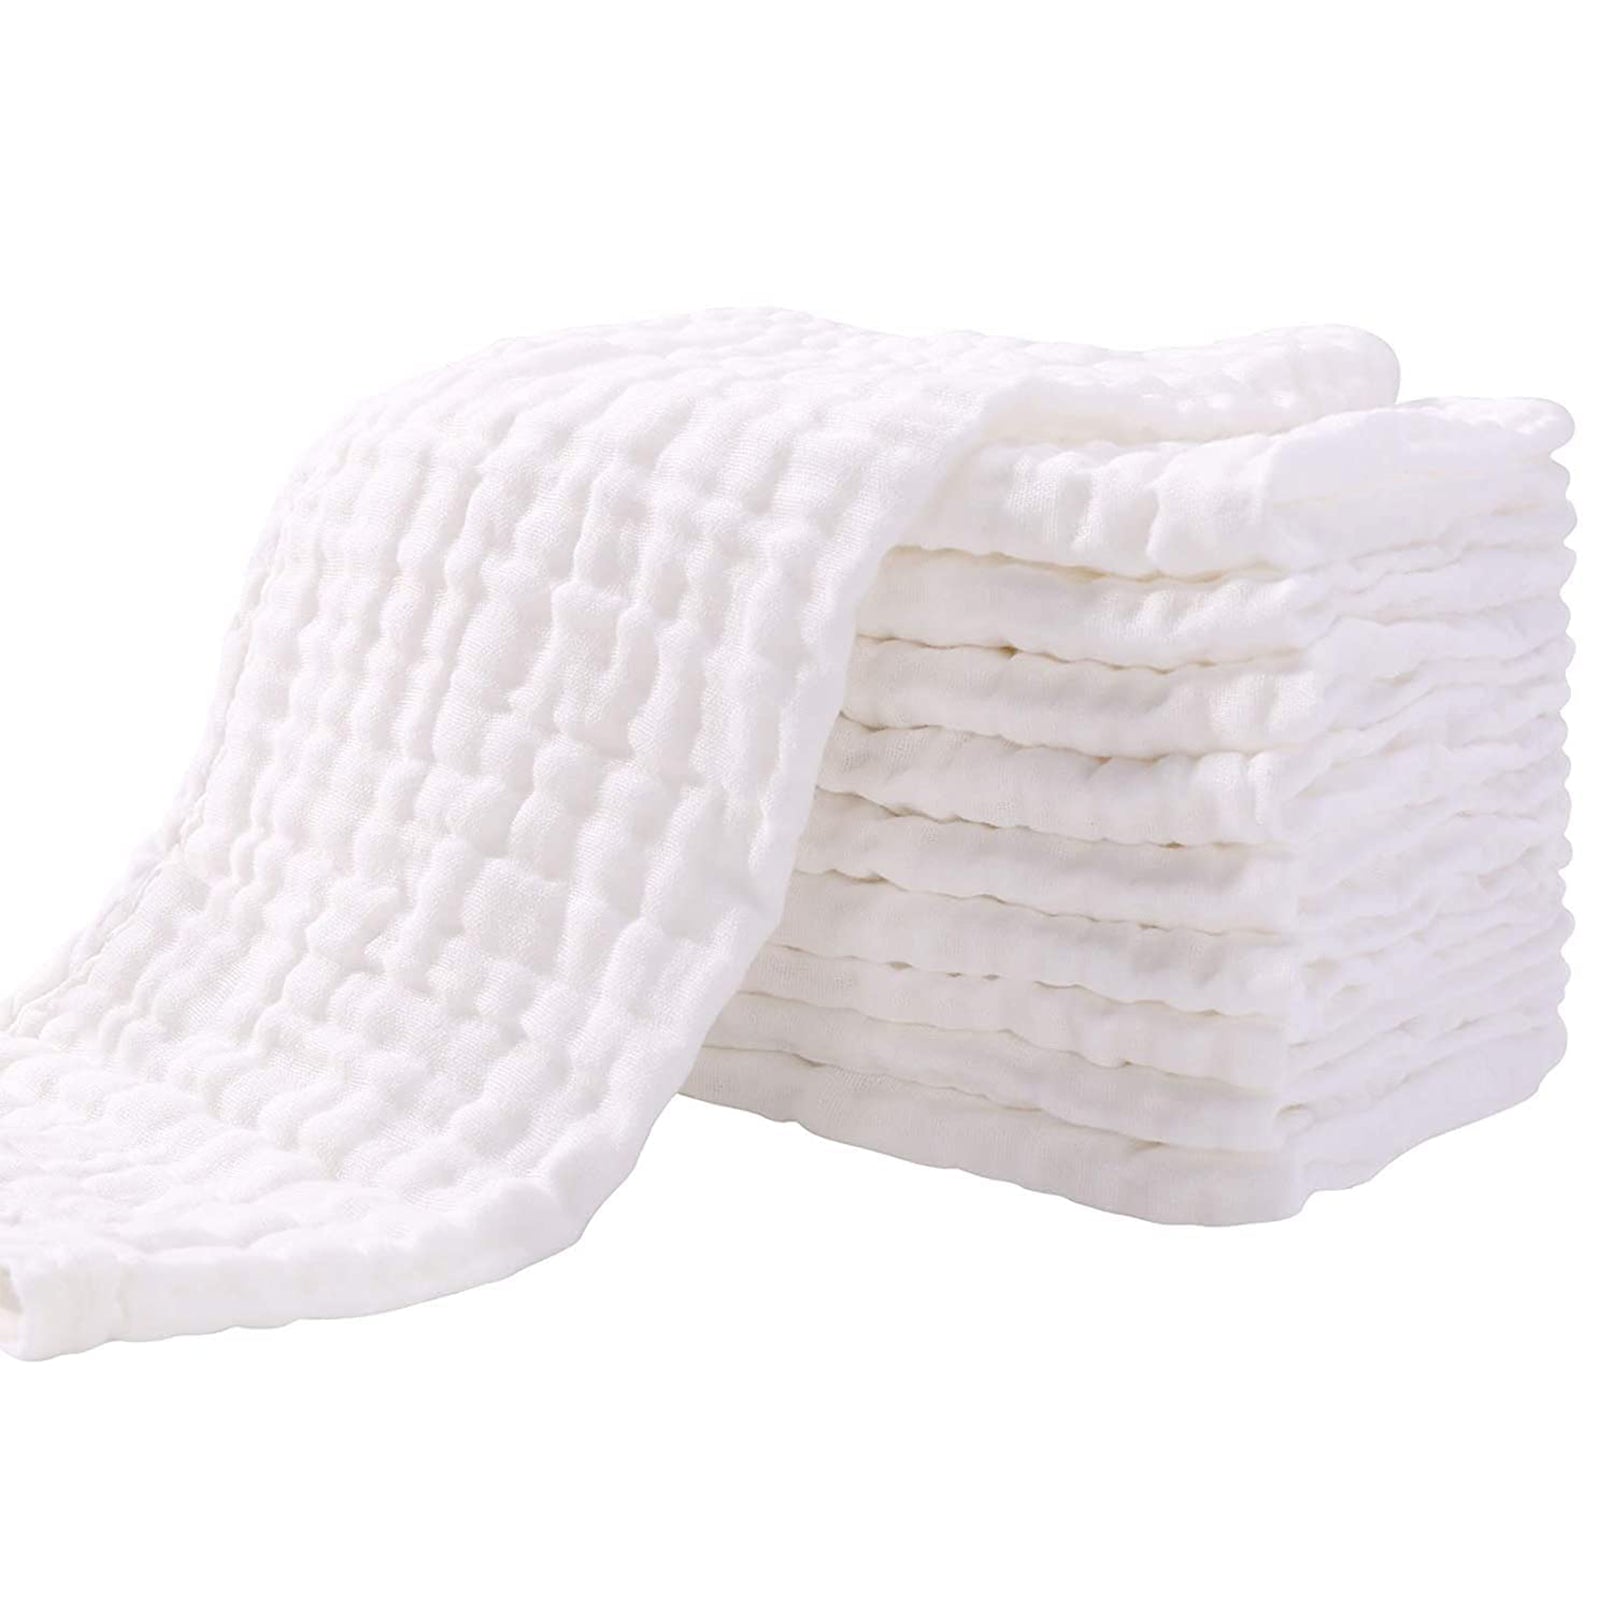 Thermal Cotton Blankets, 12 pk, Baby Bedding